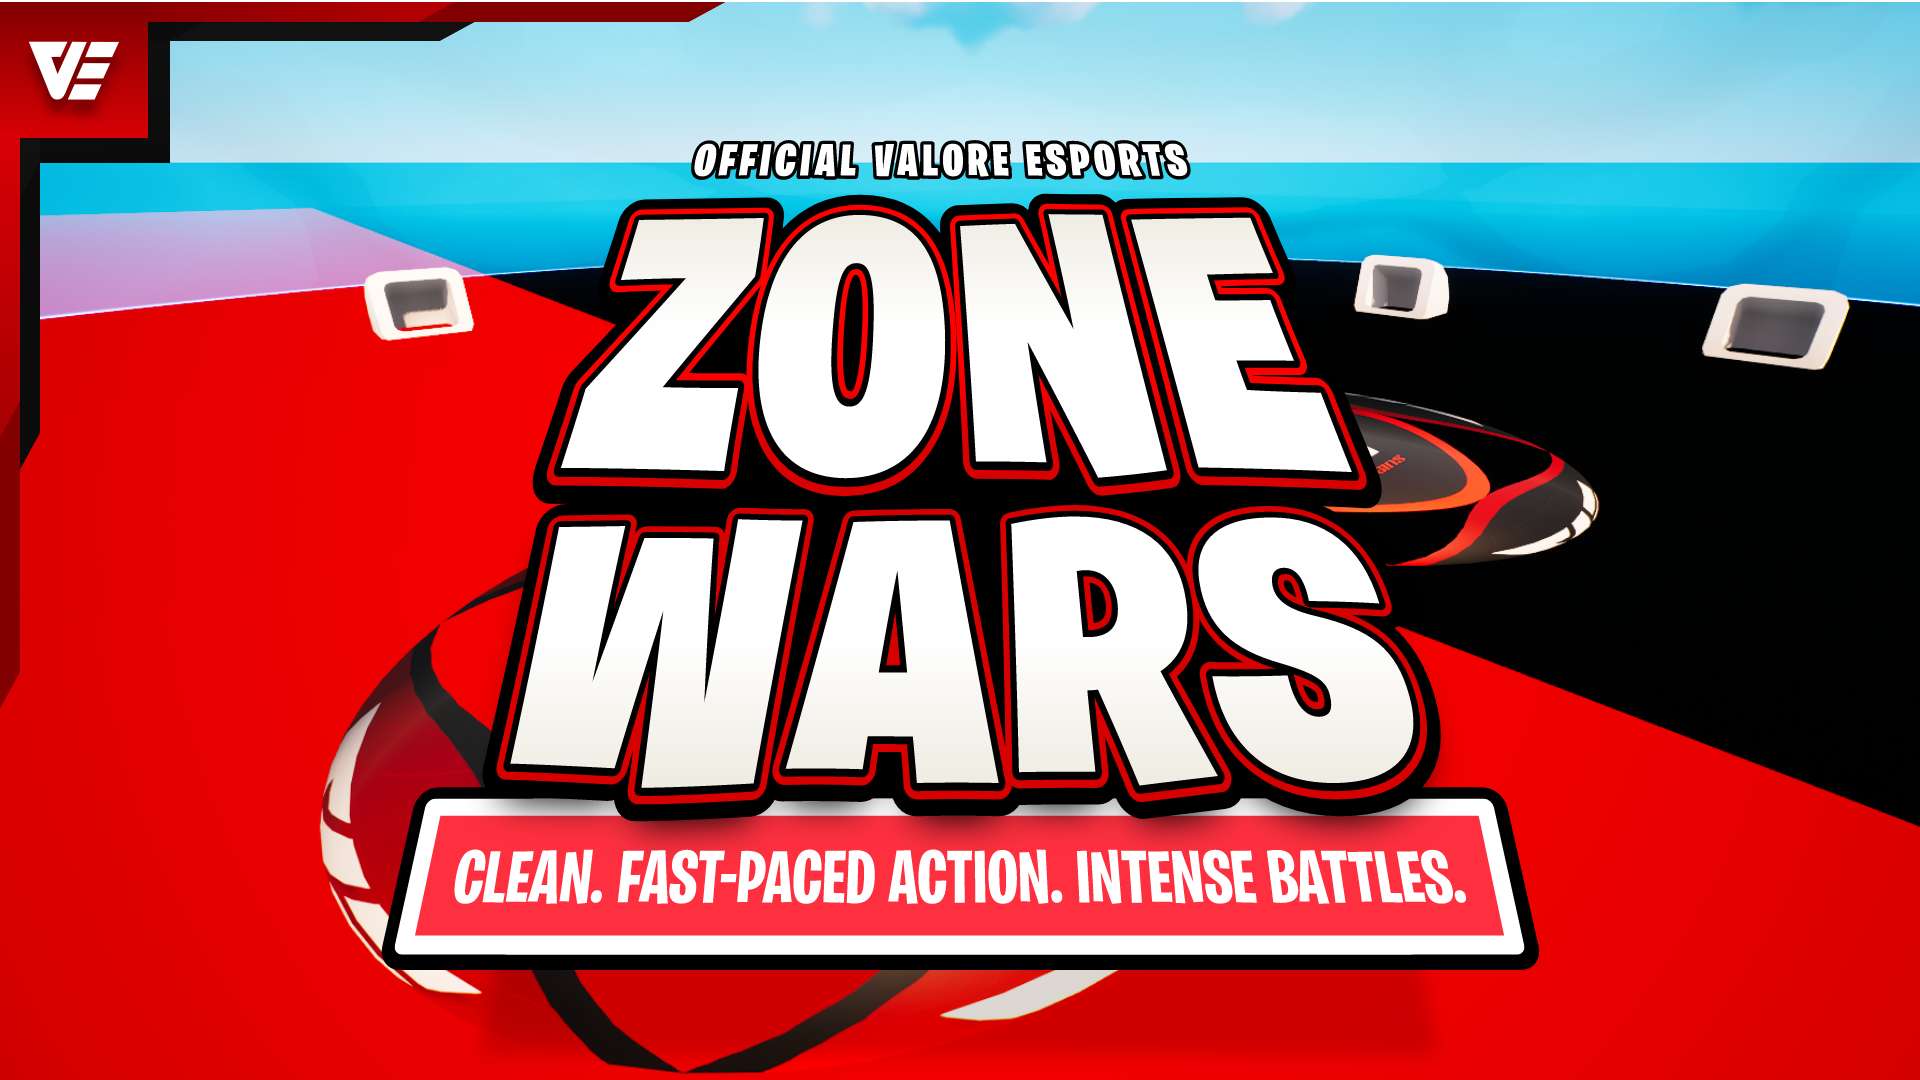 OFFICIAL VALORE ESPORTS ZONE WARS MAP